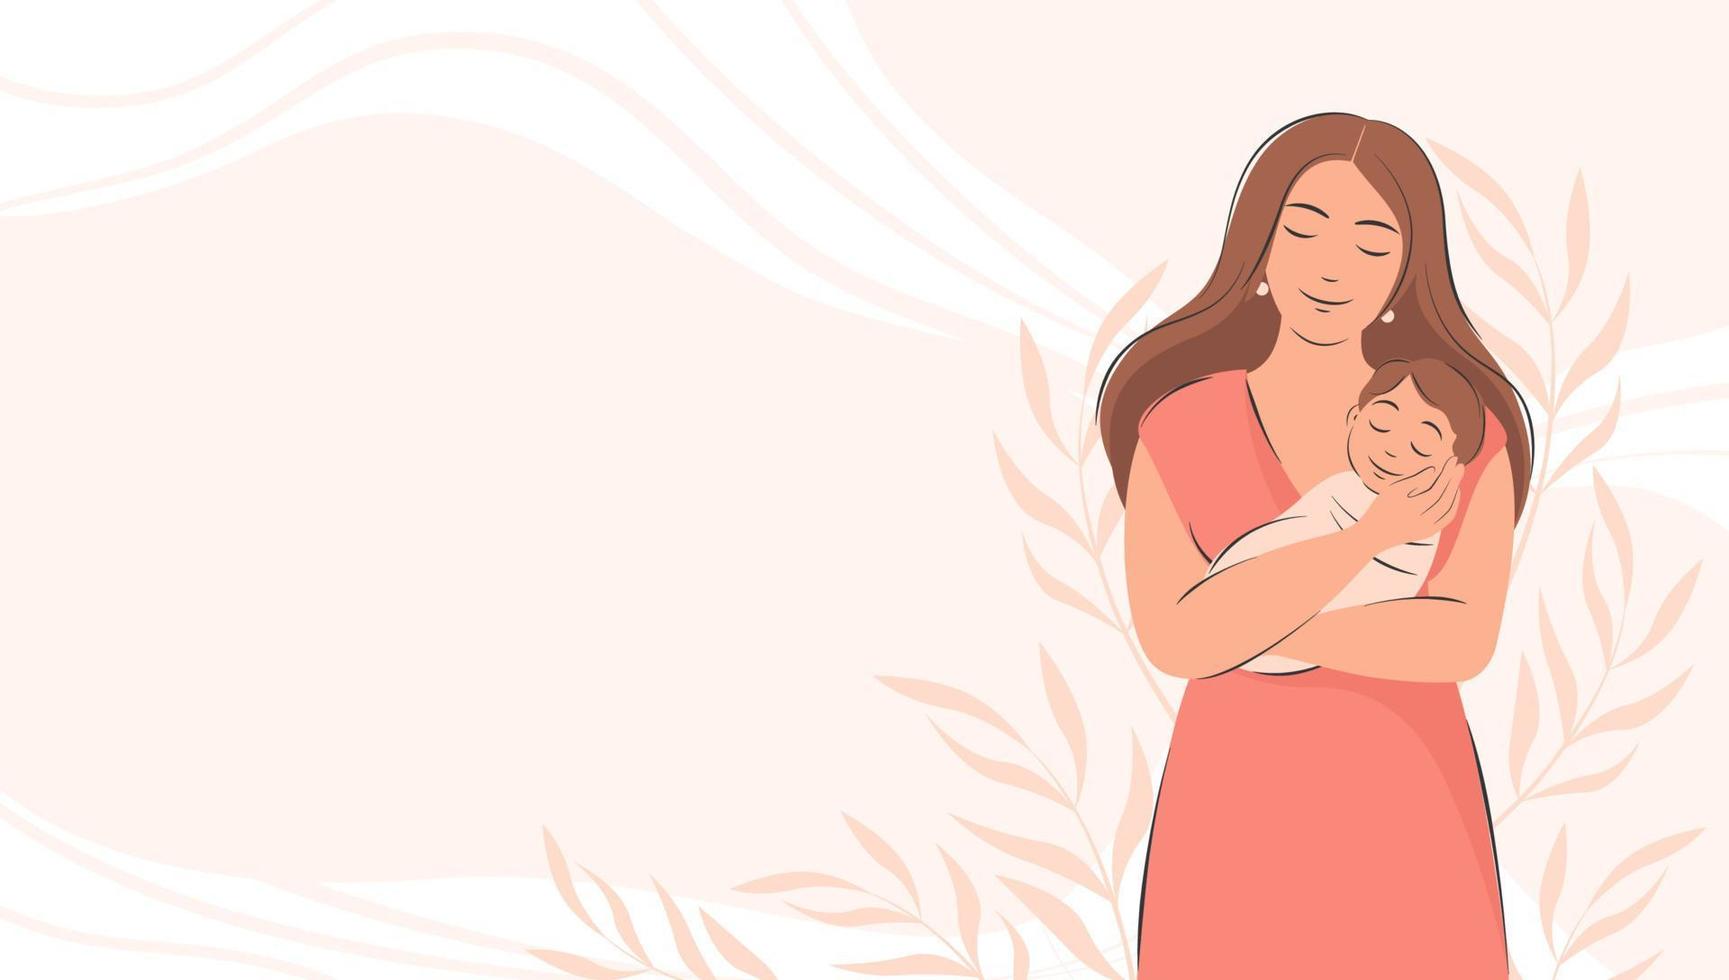 Banner about pregnancy and motherhood with place for text. Woman holding baby in her arms. Happy Mother's Day.  Flat vector illustration.